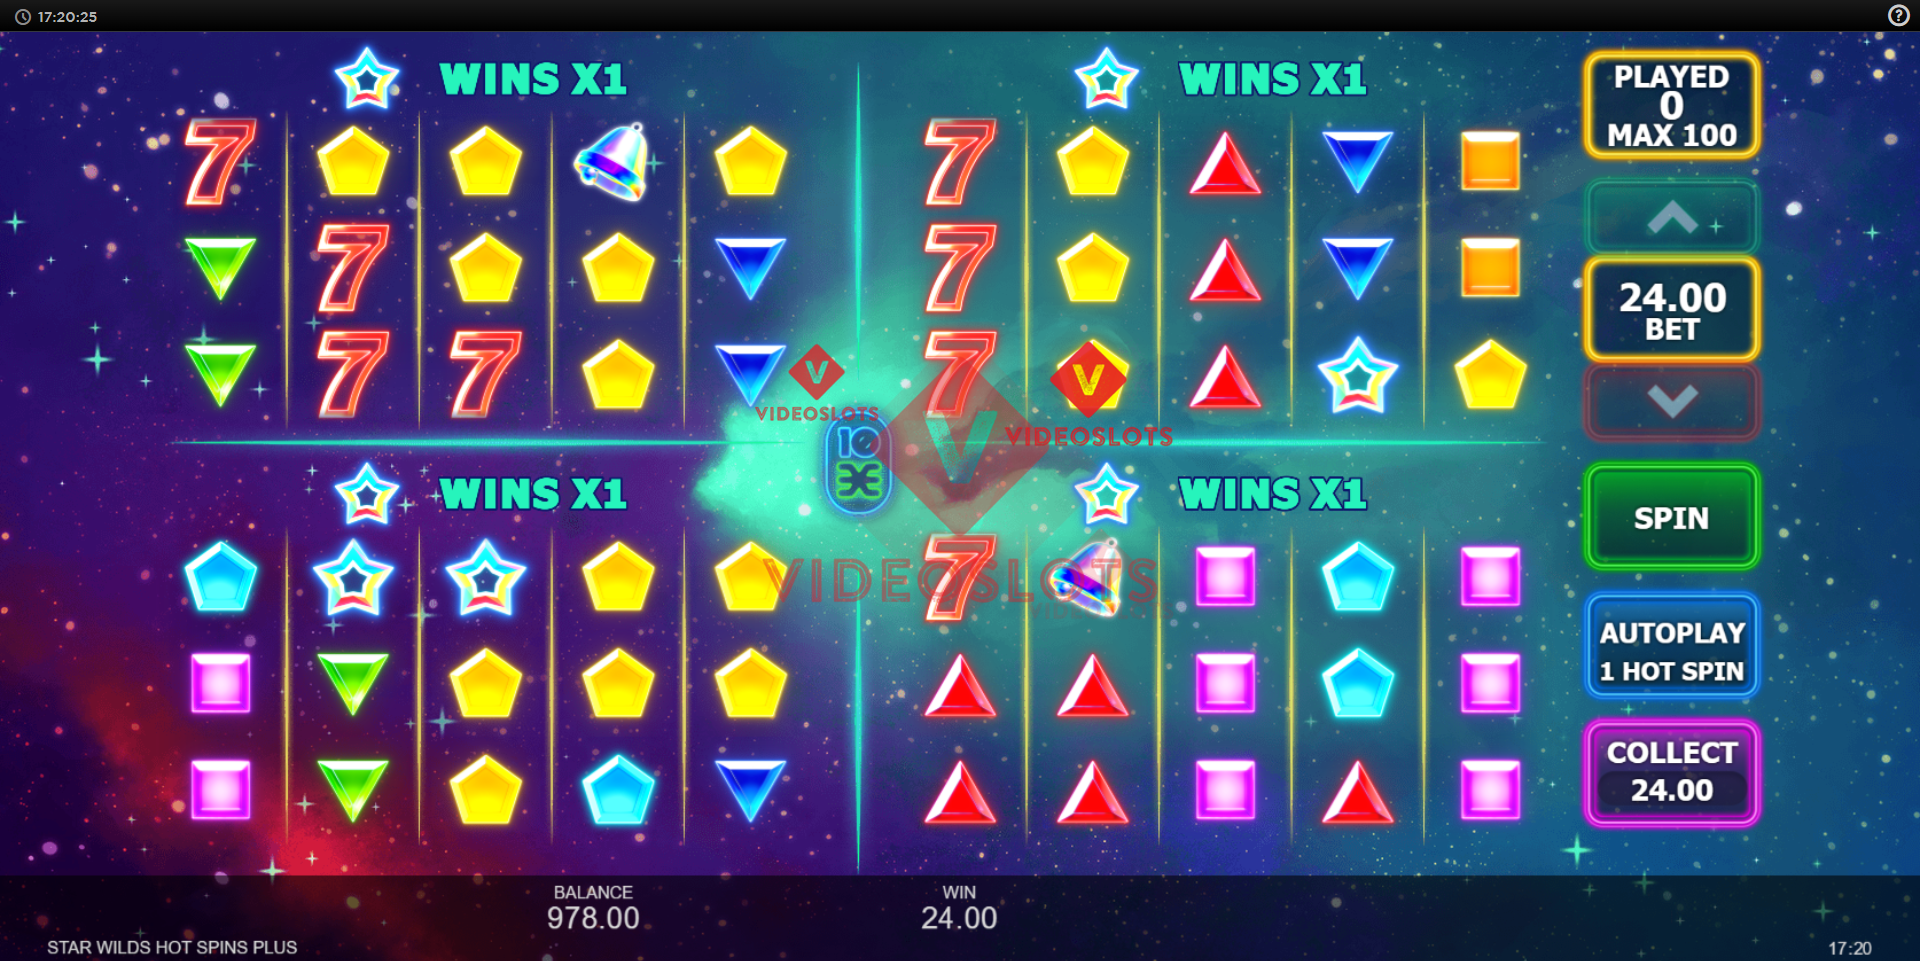 Base Game for Star Wilds Hot Spins Plus slot from Inspired Gaming